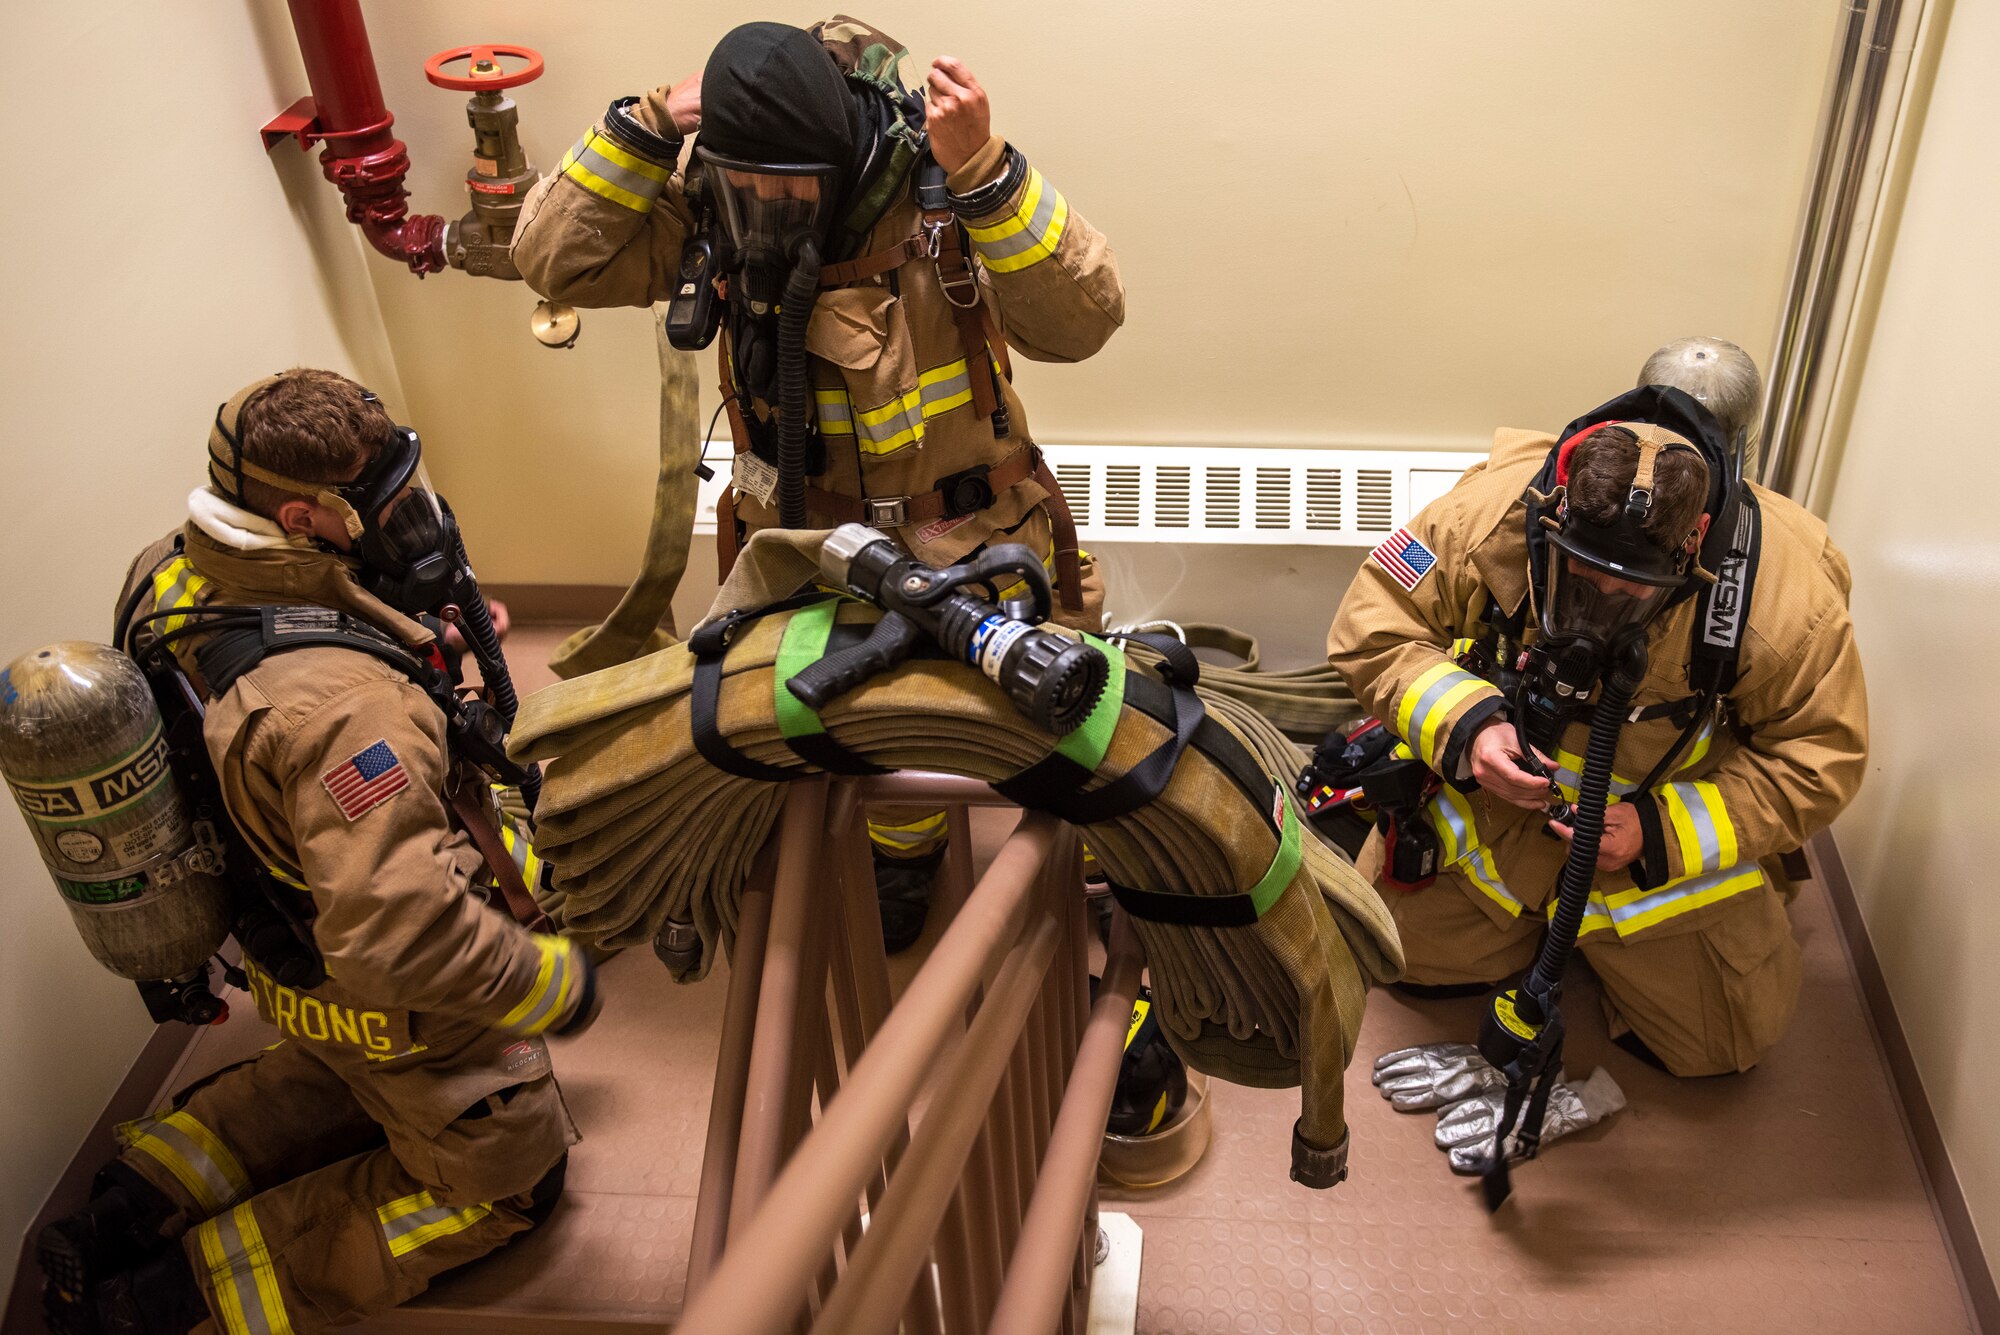 51st CES firefighters responded to a series of training scenarios to ensure all safety procedures are consistently adhered to in timely manner.